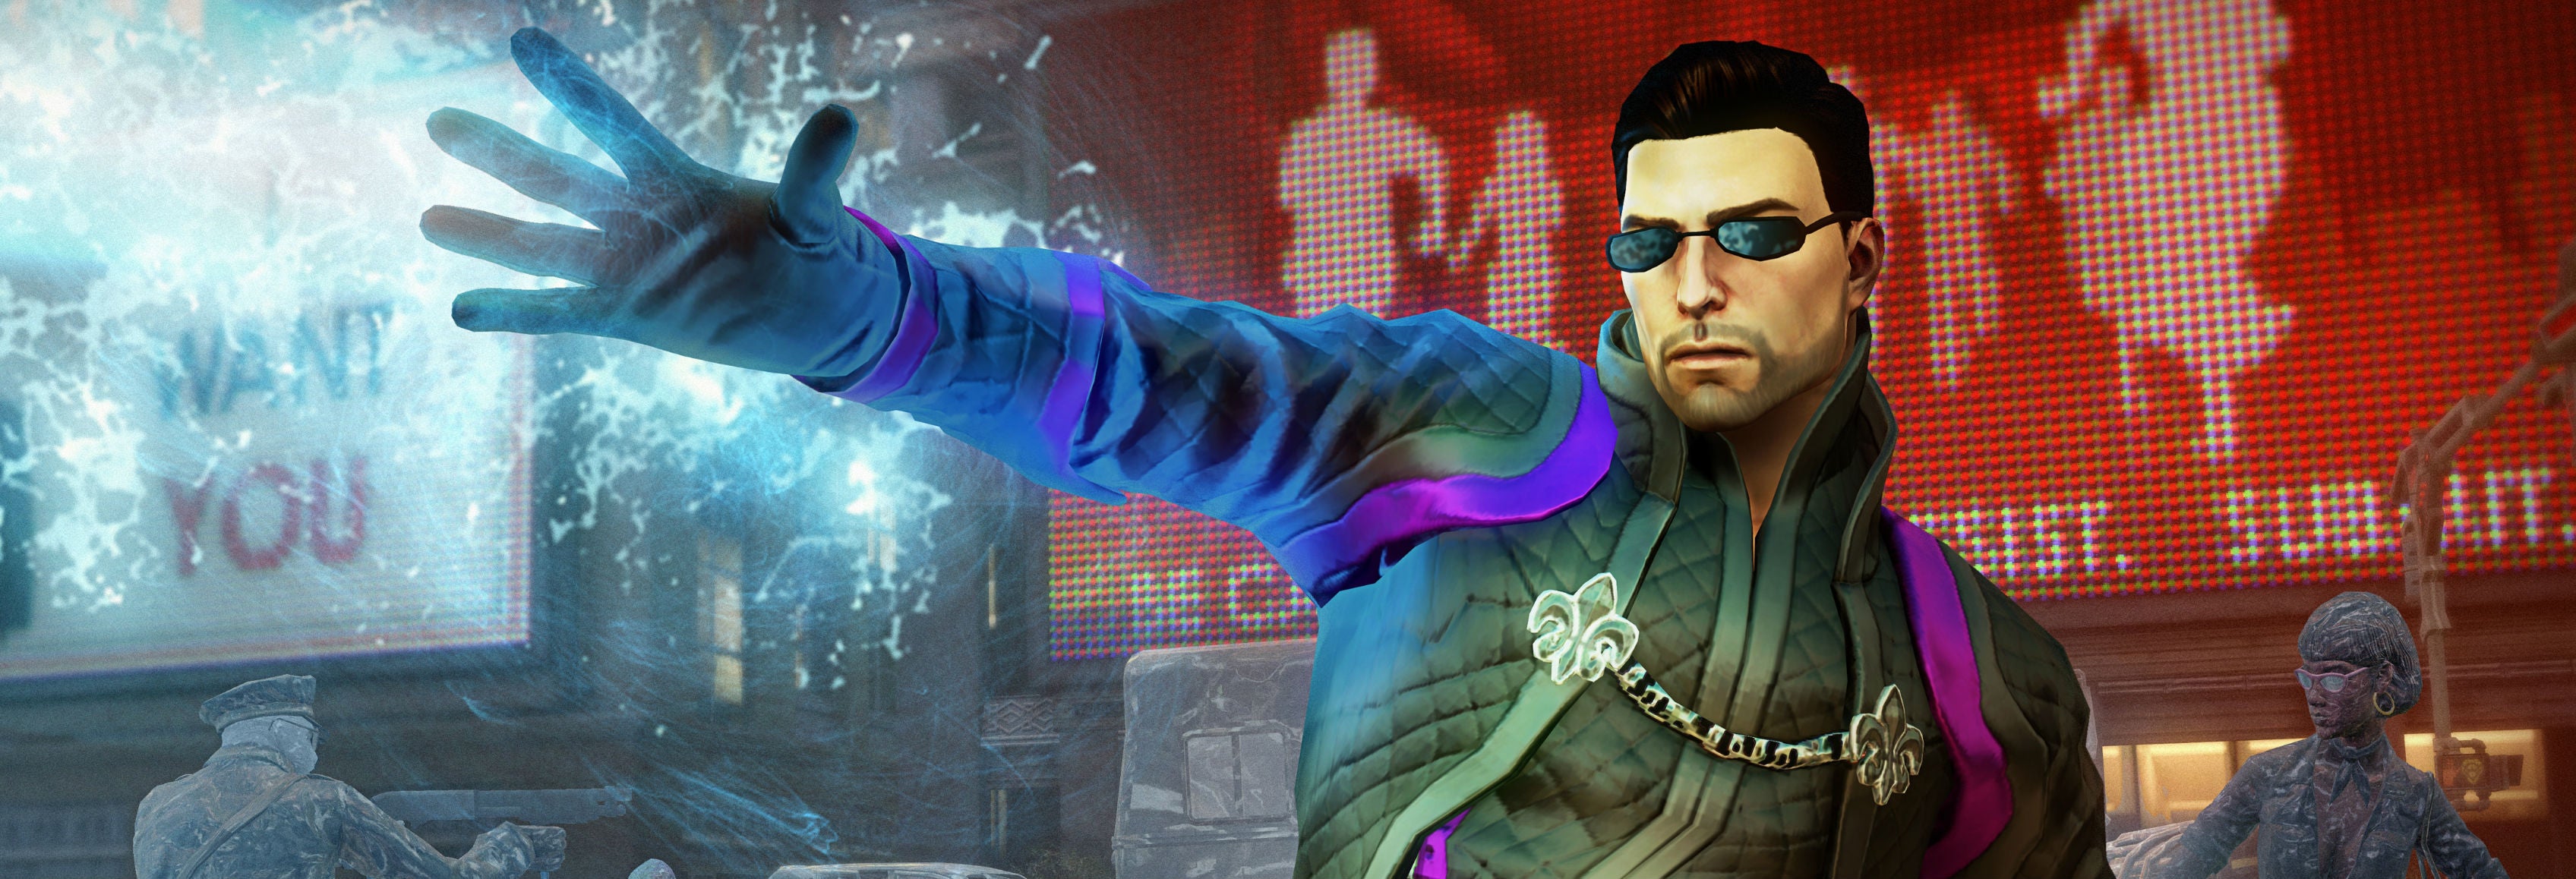 Image for Saints Row IV Review